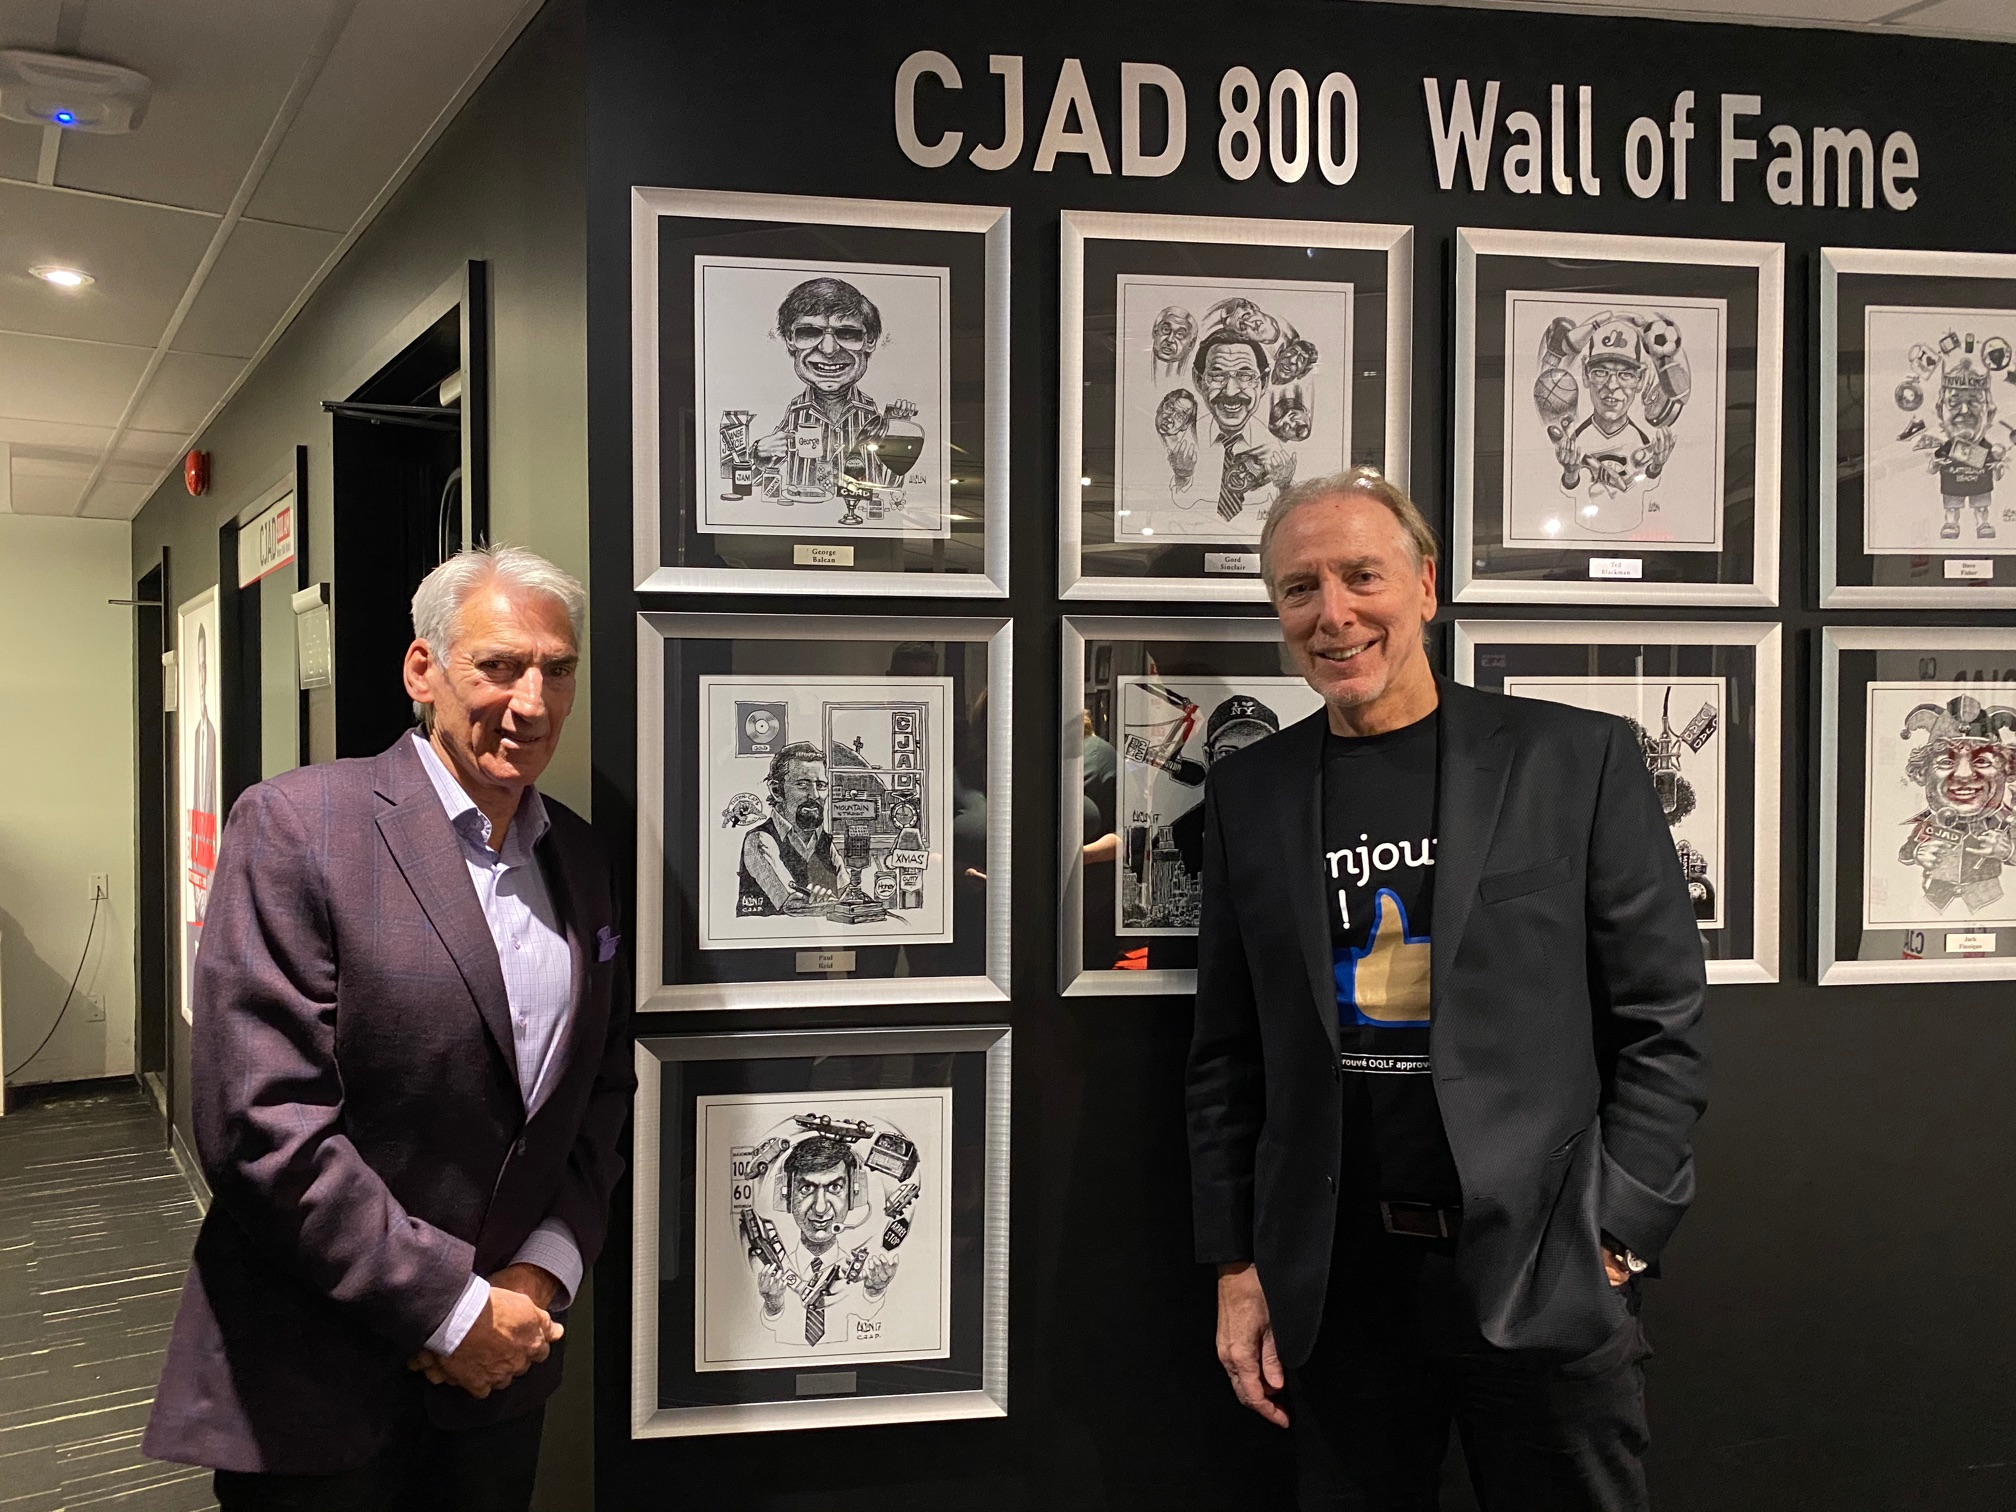 Rick Leckner: from the chopper to the CJAD 800 Wall of Fame